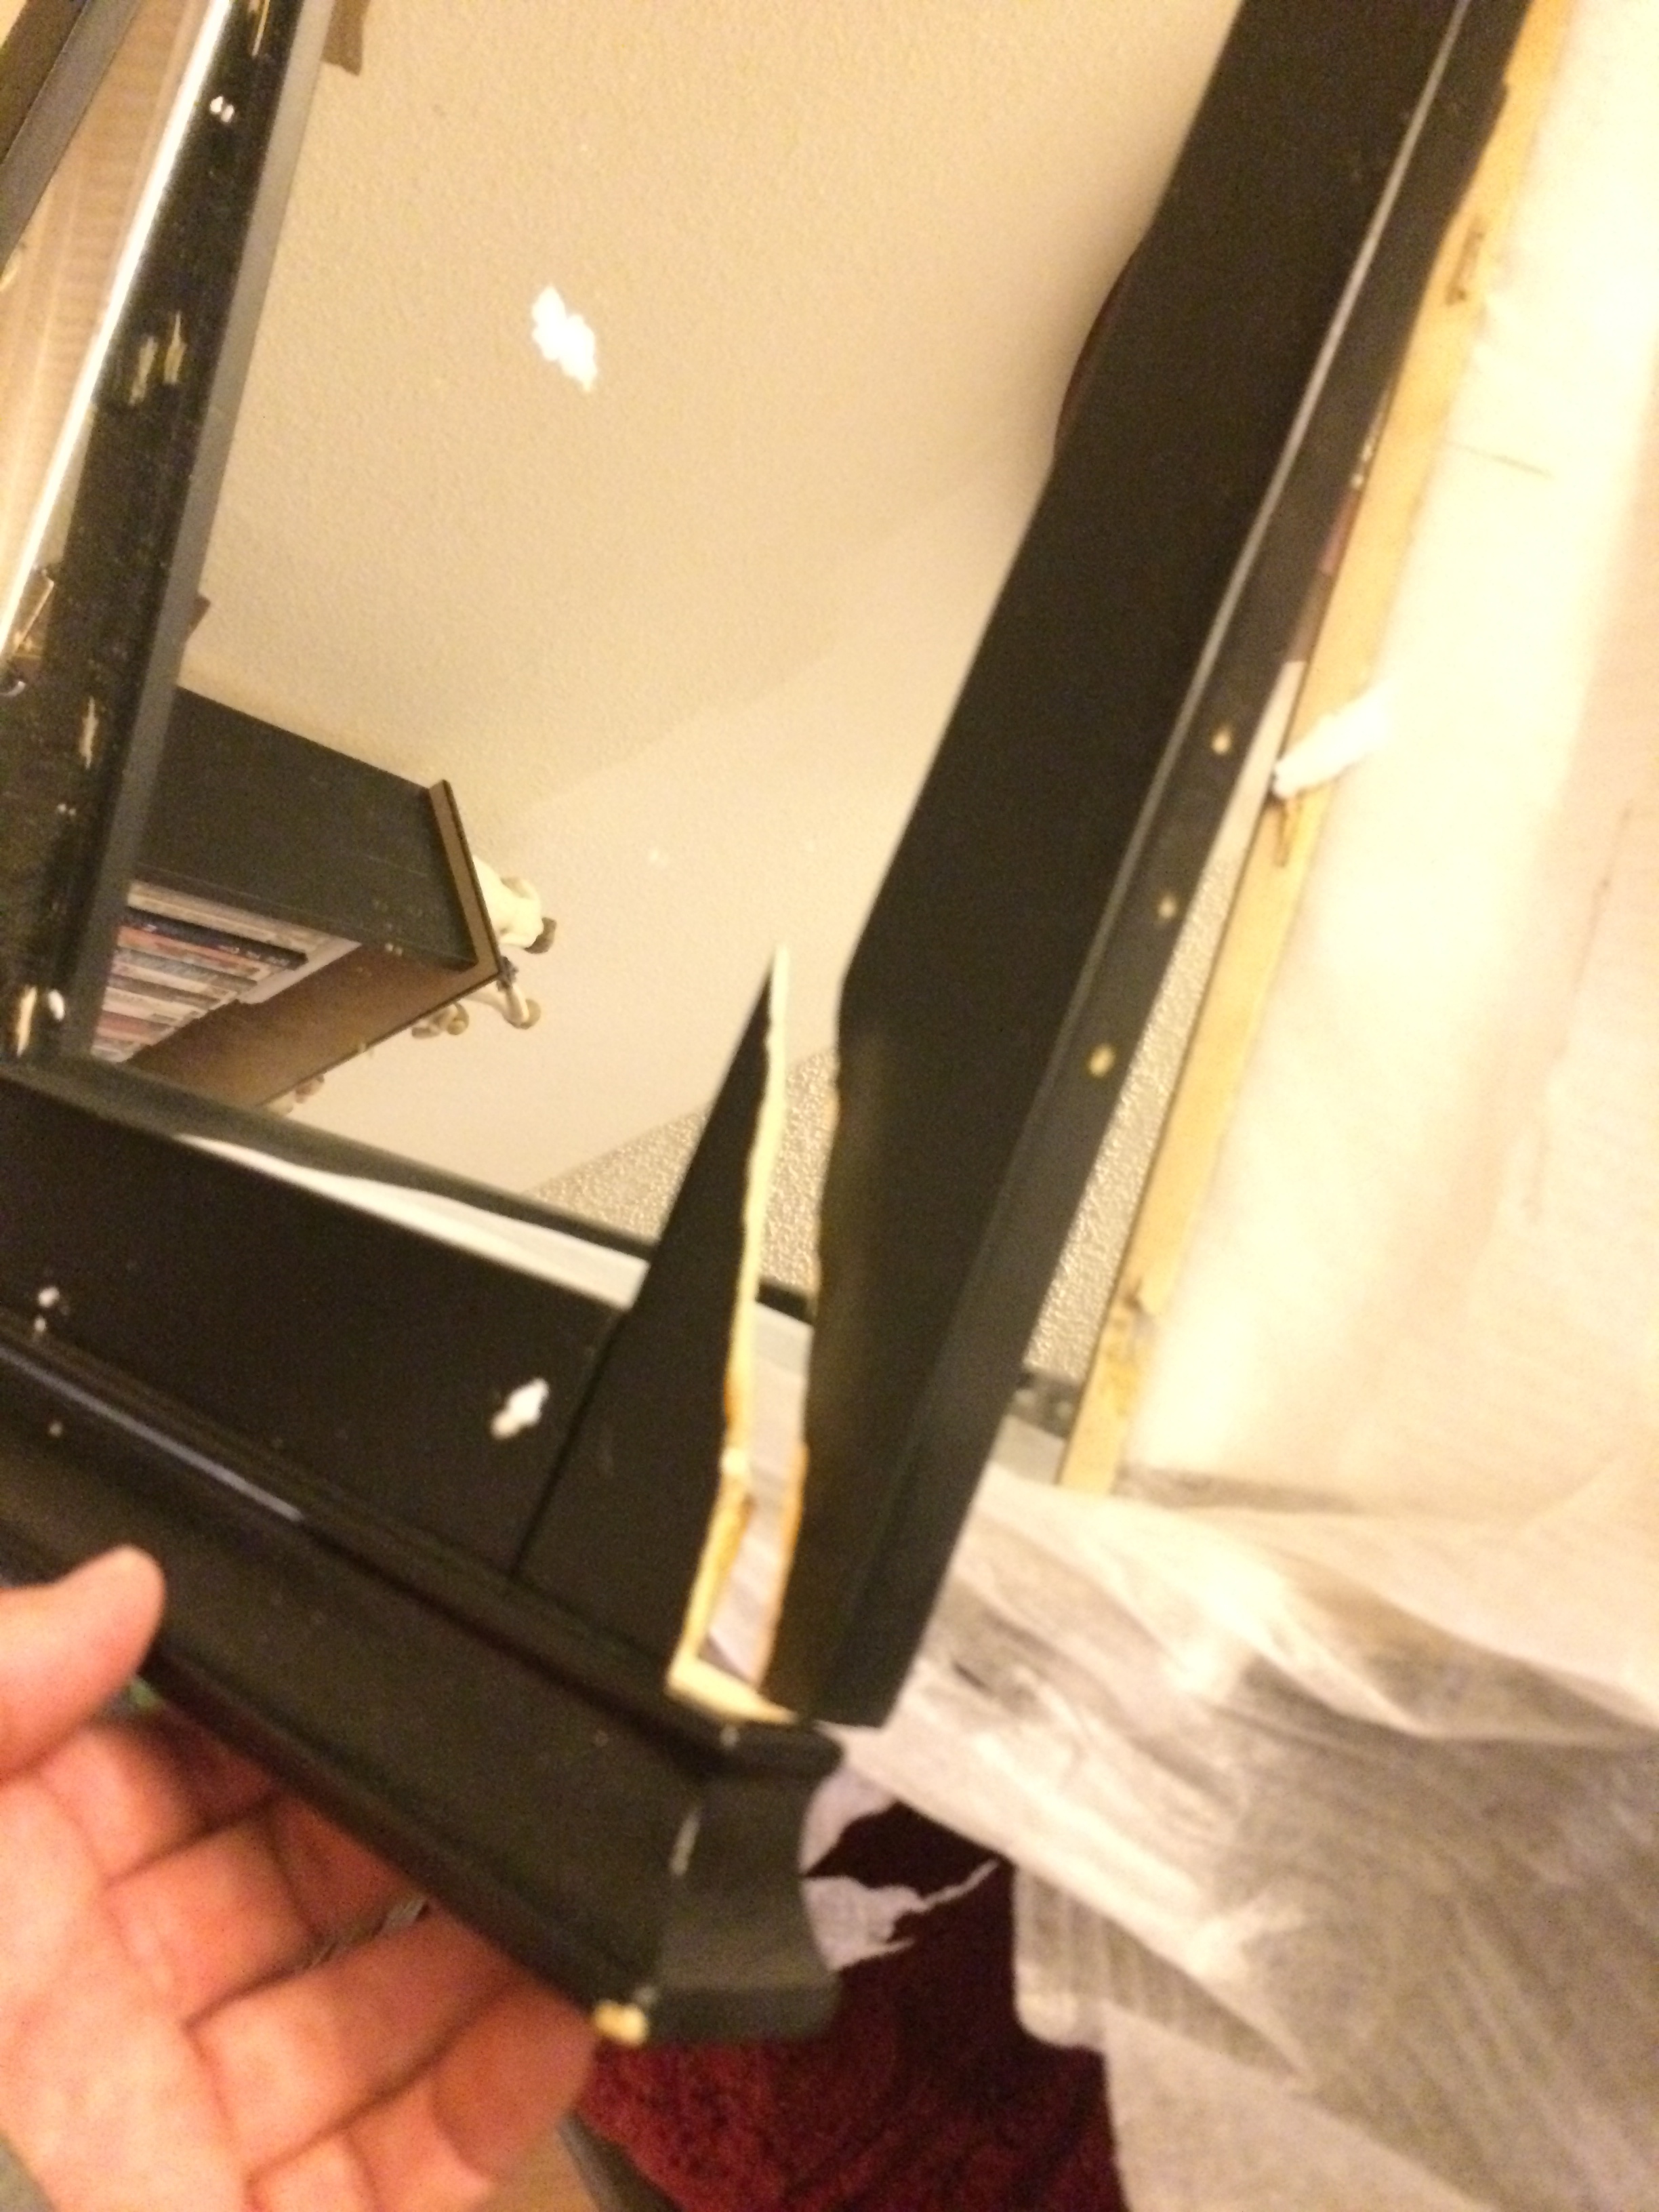 This is the replacement I received.  Note it is only the center portion of the three piece mirror.